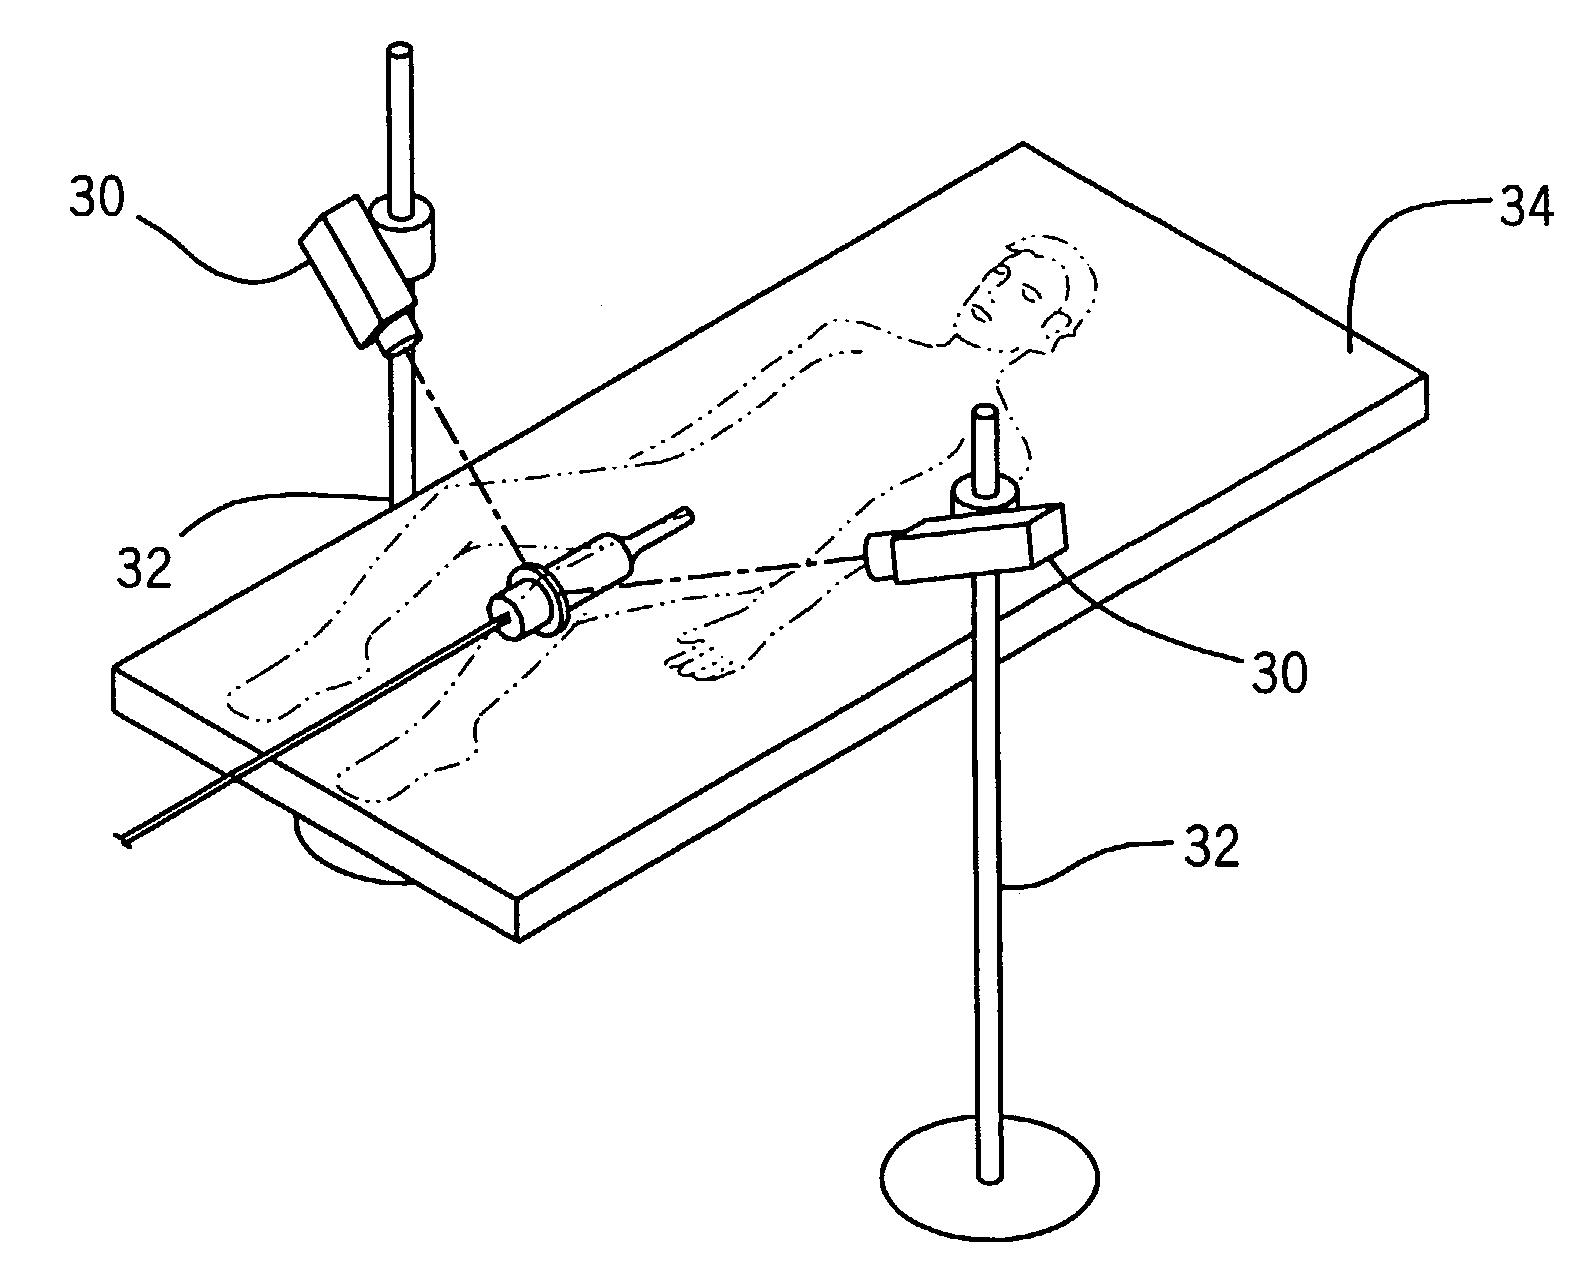 Apparatus and method for registration, guidance and targeting of external beam radiation therapy